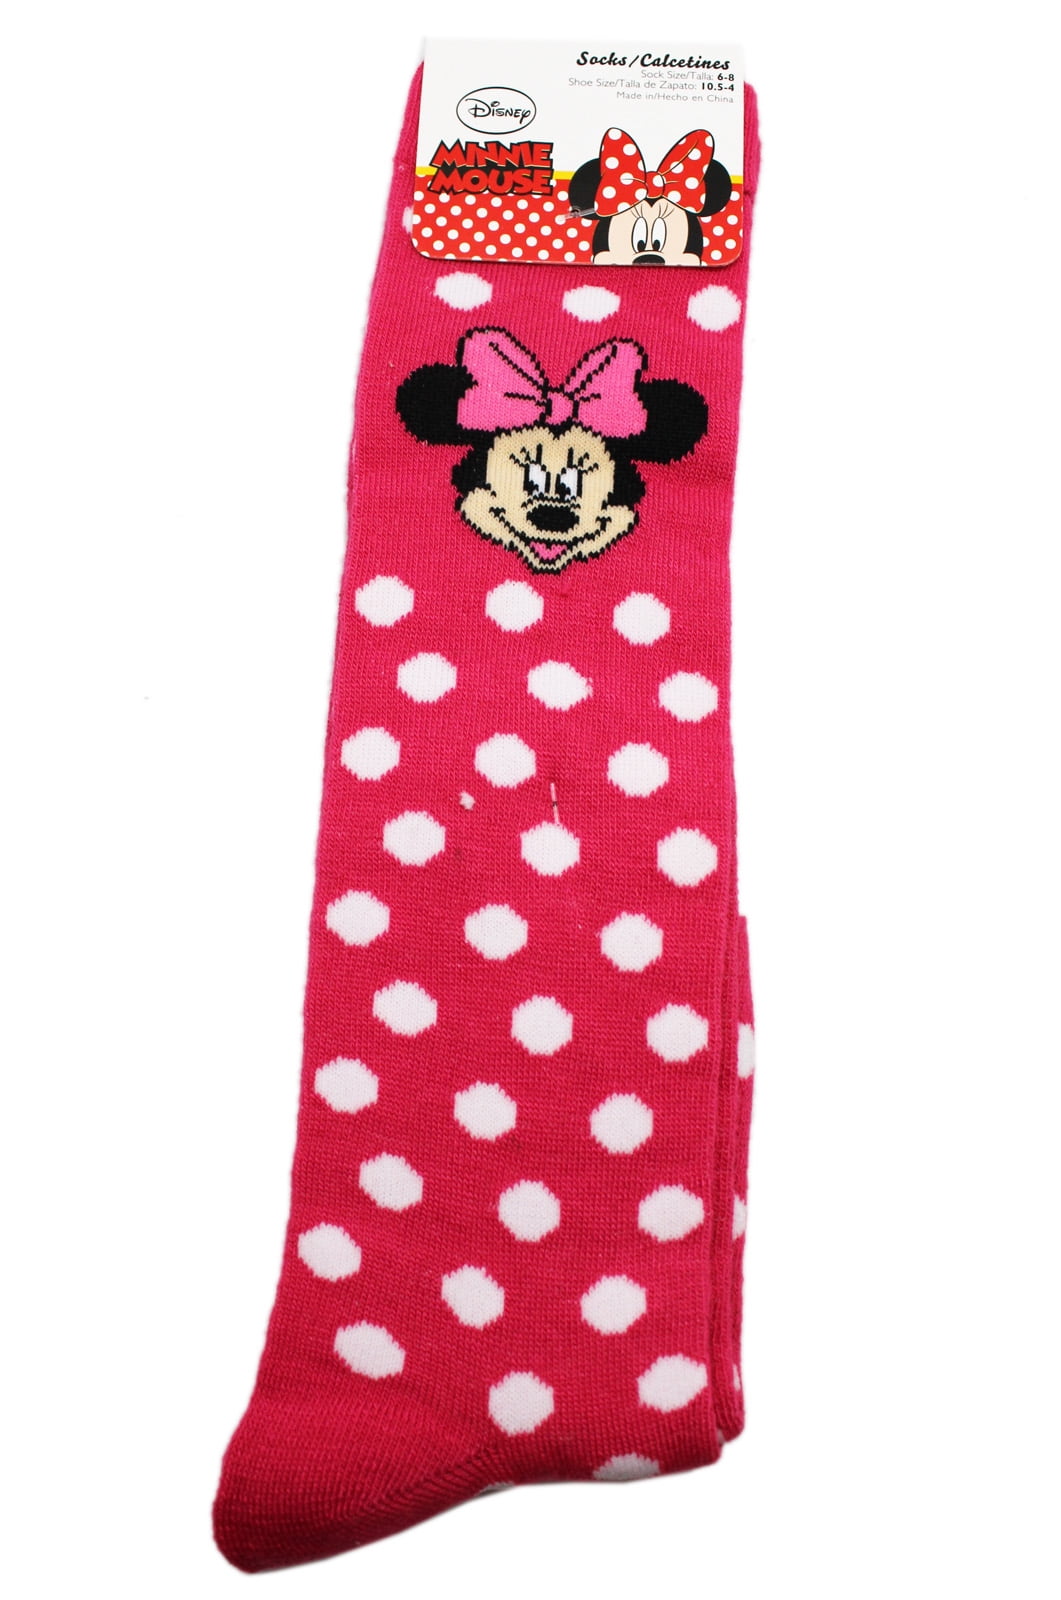 Minnie Mouse - Disney's Minnie Mouse Red/White Polka Dotted Long Socks ...